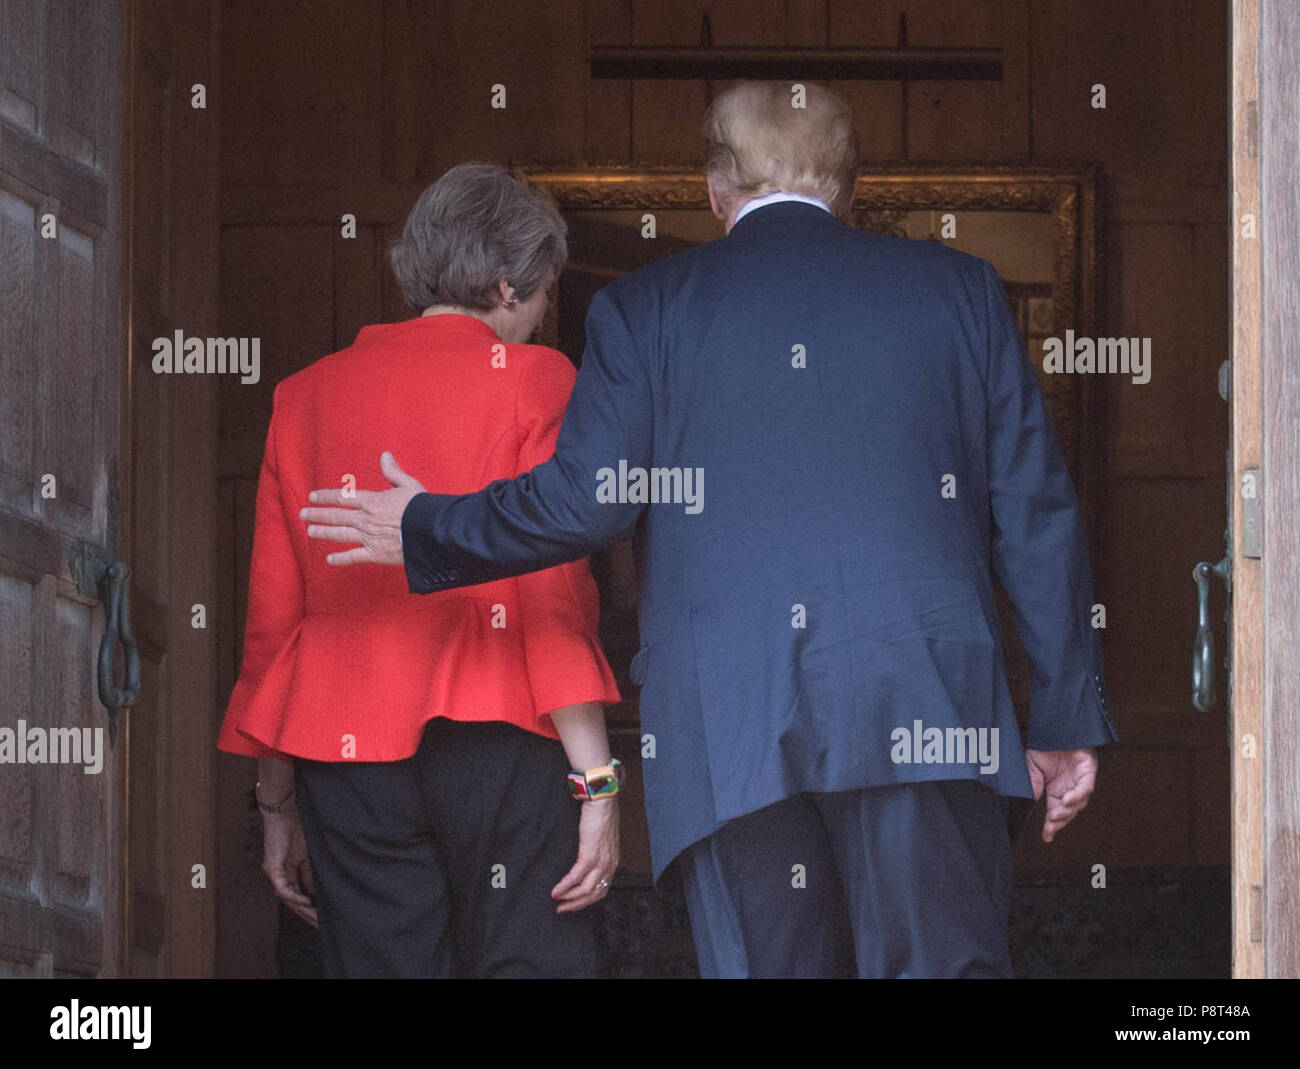 Prime Minister Theresa May and US President Donald Trump walk through the doors at Chequers, after he arrived for talks at her country residence in Buckinghamshire. Stock Photo